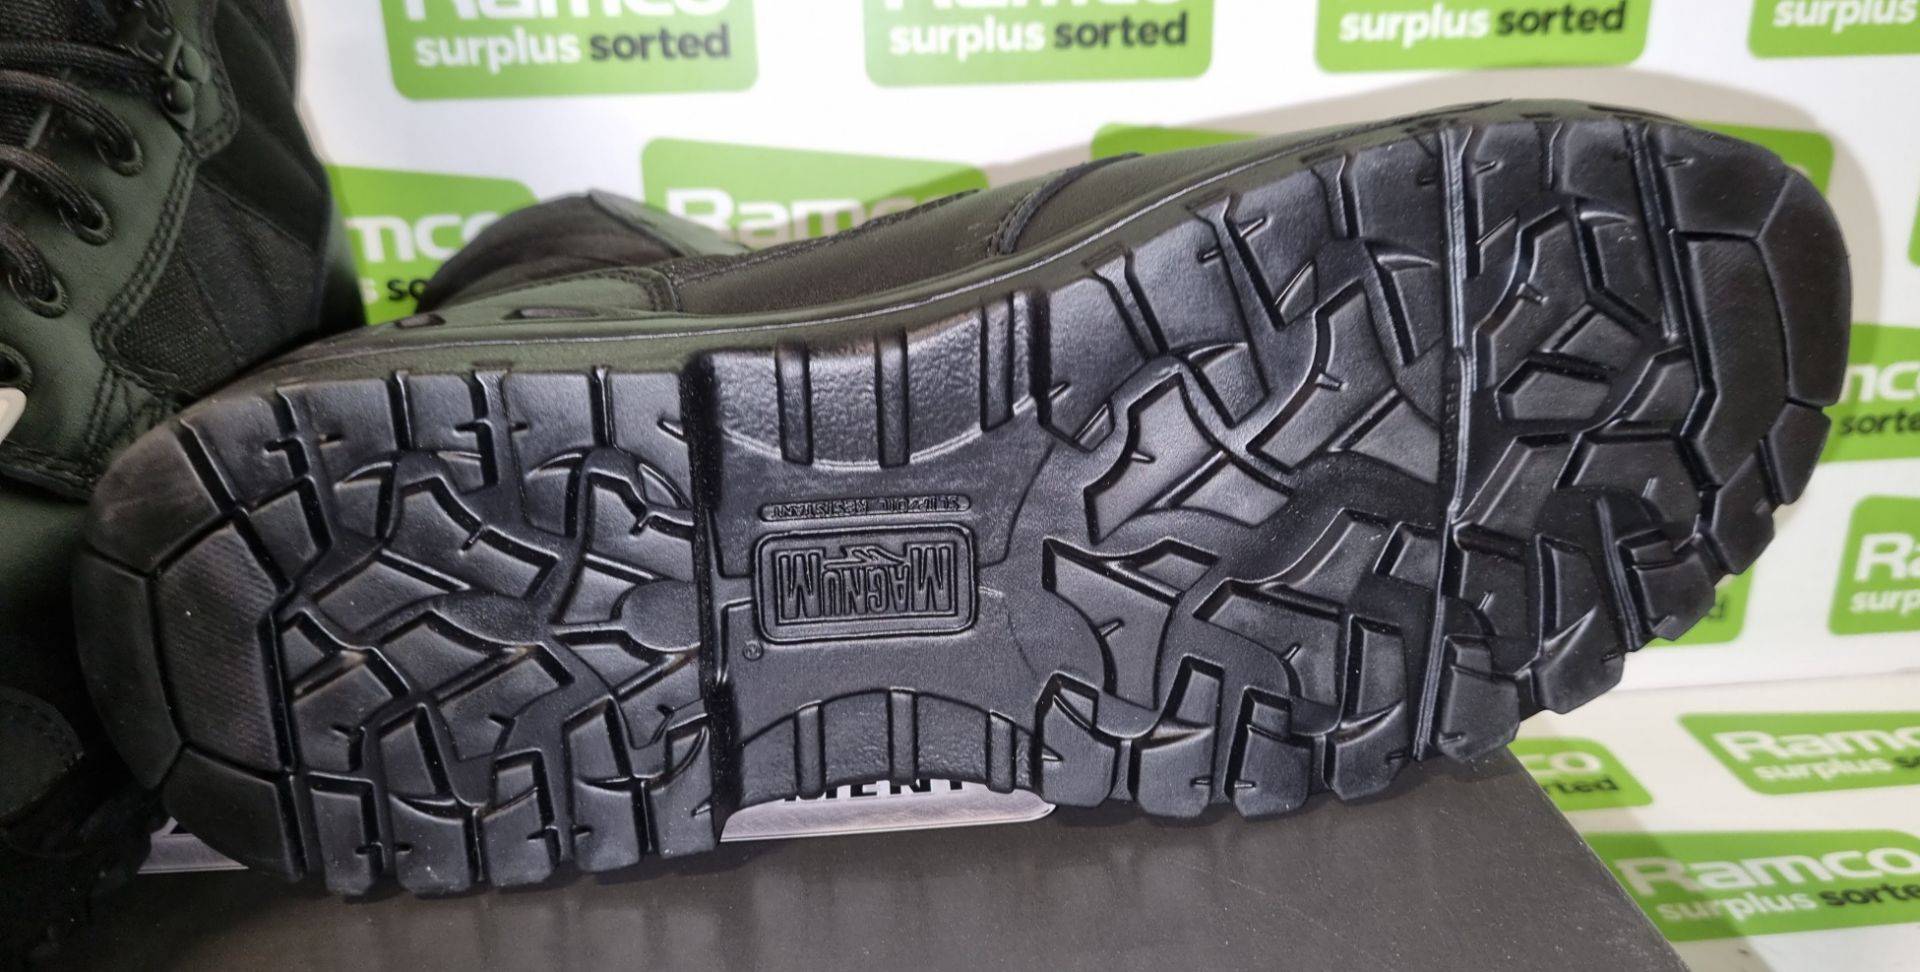 5x pairs of Magnum hot weather boots - Size 10M - Image 3 of 5